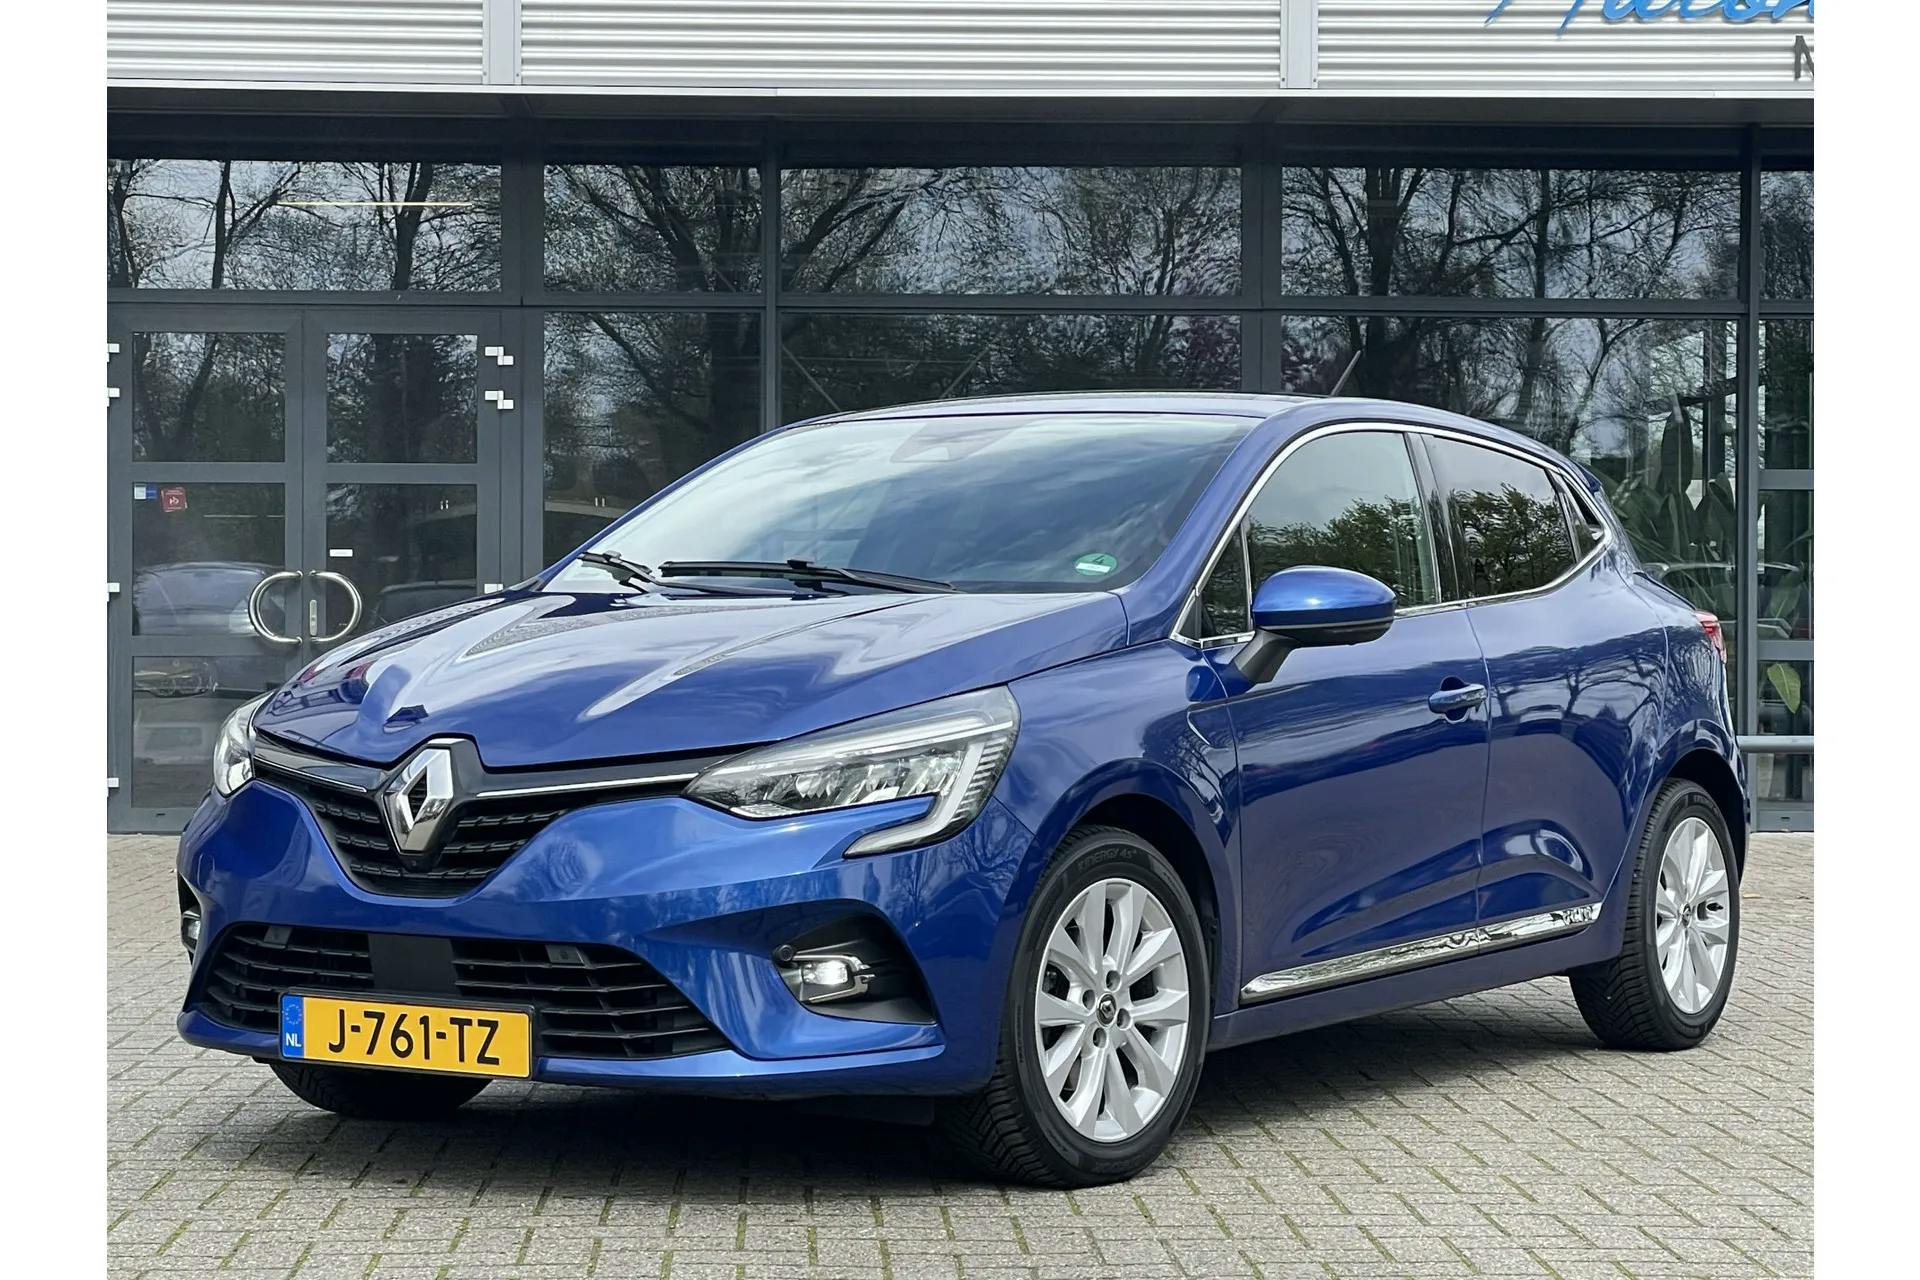 1.3 TCe Intens Automaat/Led/Navigatie/Cruise/360 Camera/Keyless entry